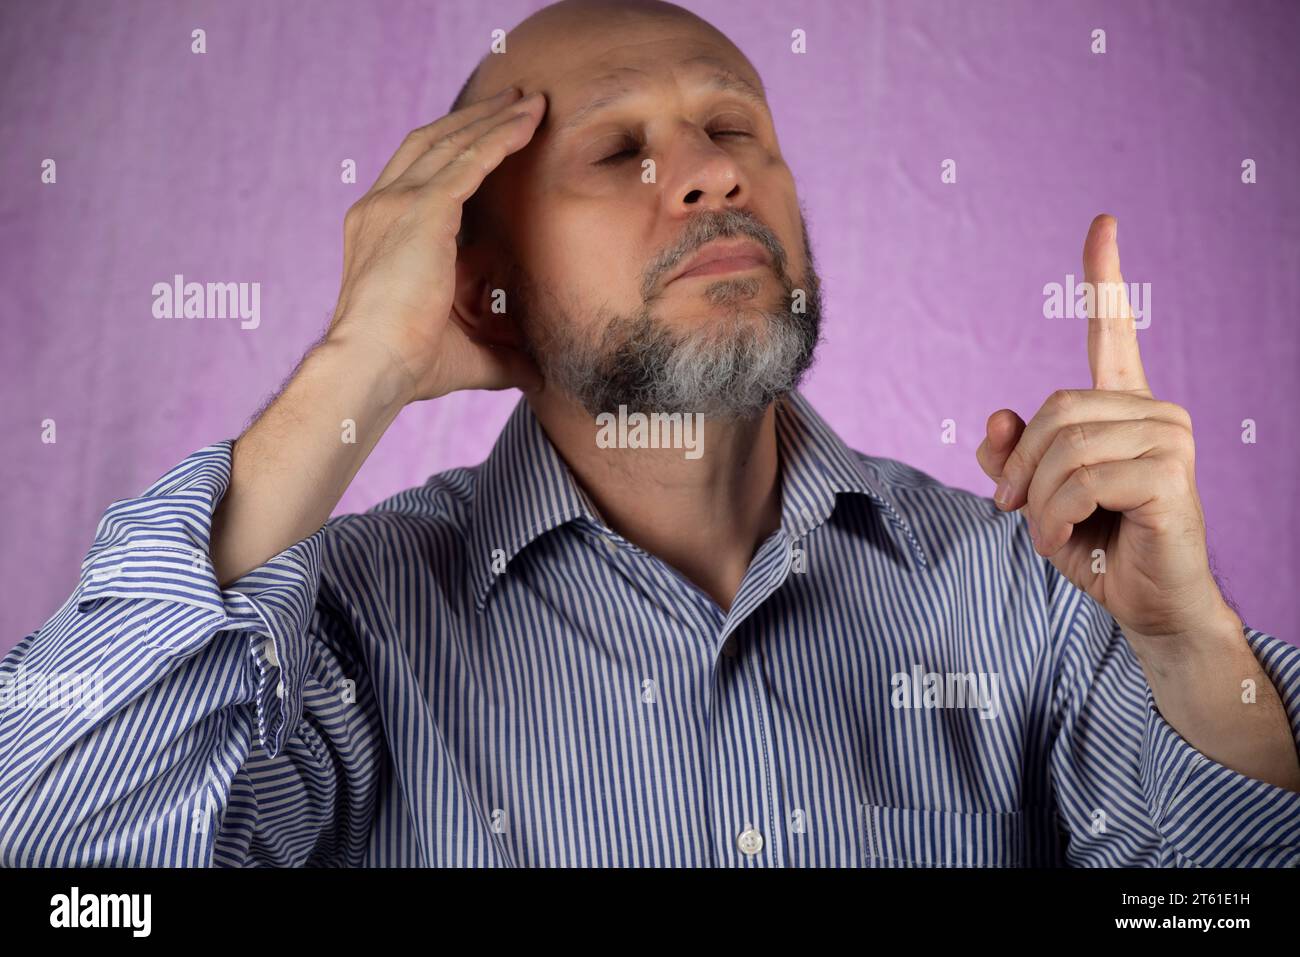 Man making sign with his hand against pink background. Stock Photo